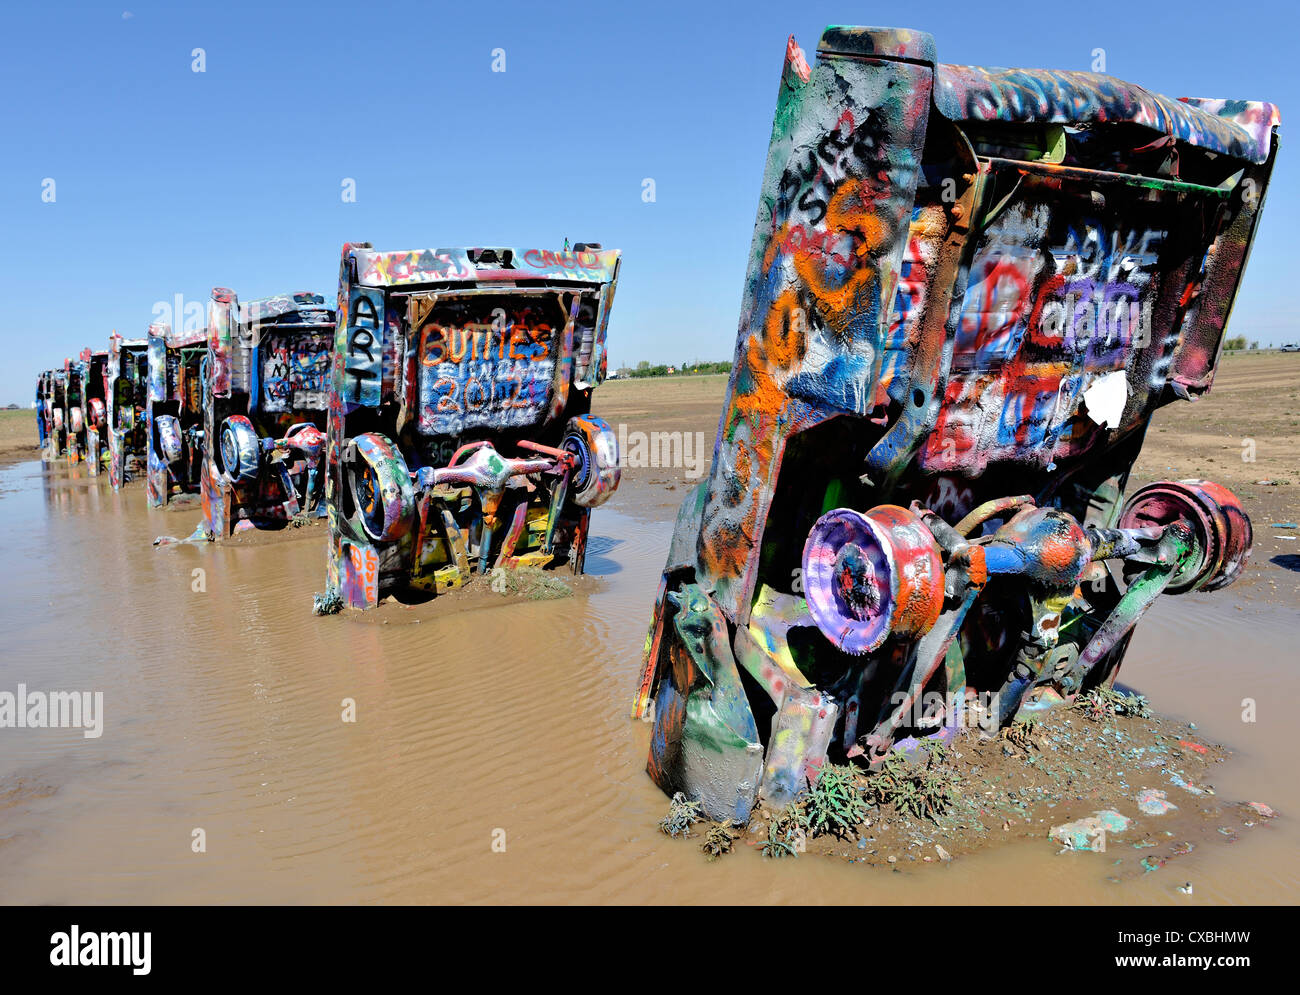 Cadillac Ranch, -art installation sculpture located on Route 66 in Amarillo Texas. Stock Photo